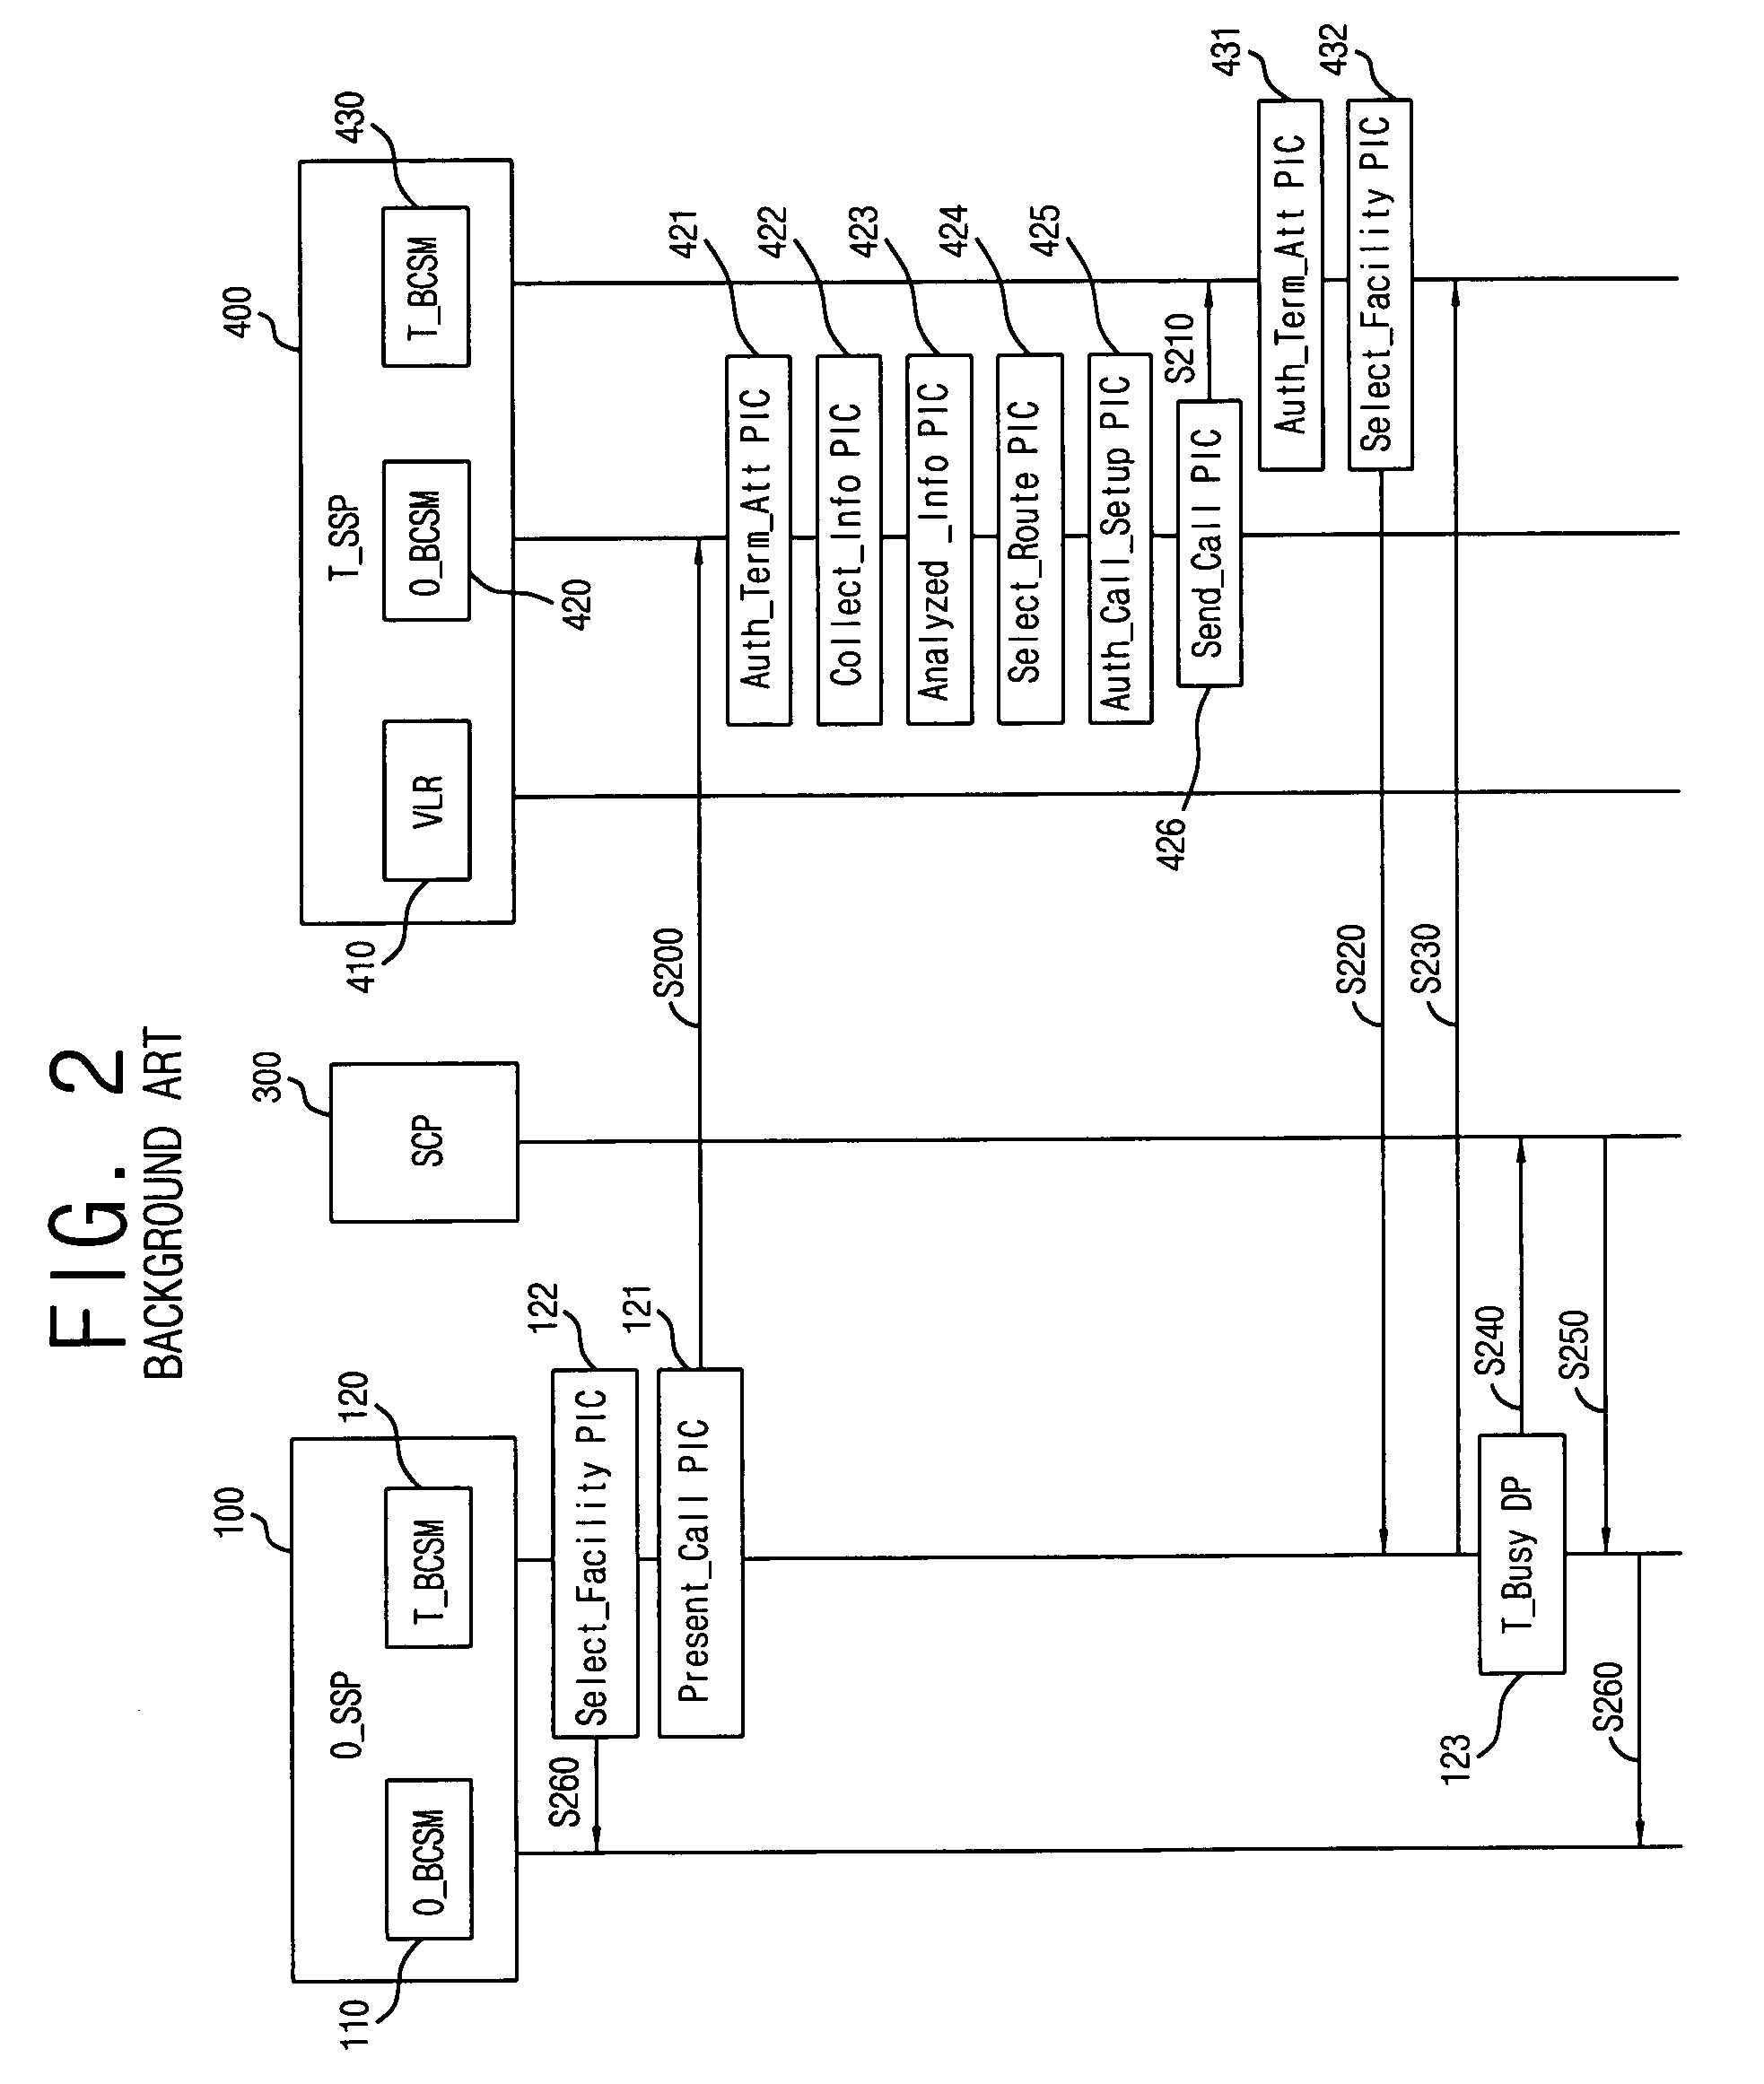 Call processing method during termination busy state of terminal in radio intelligent network system